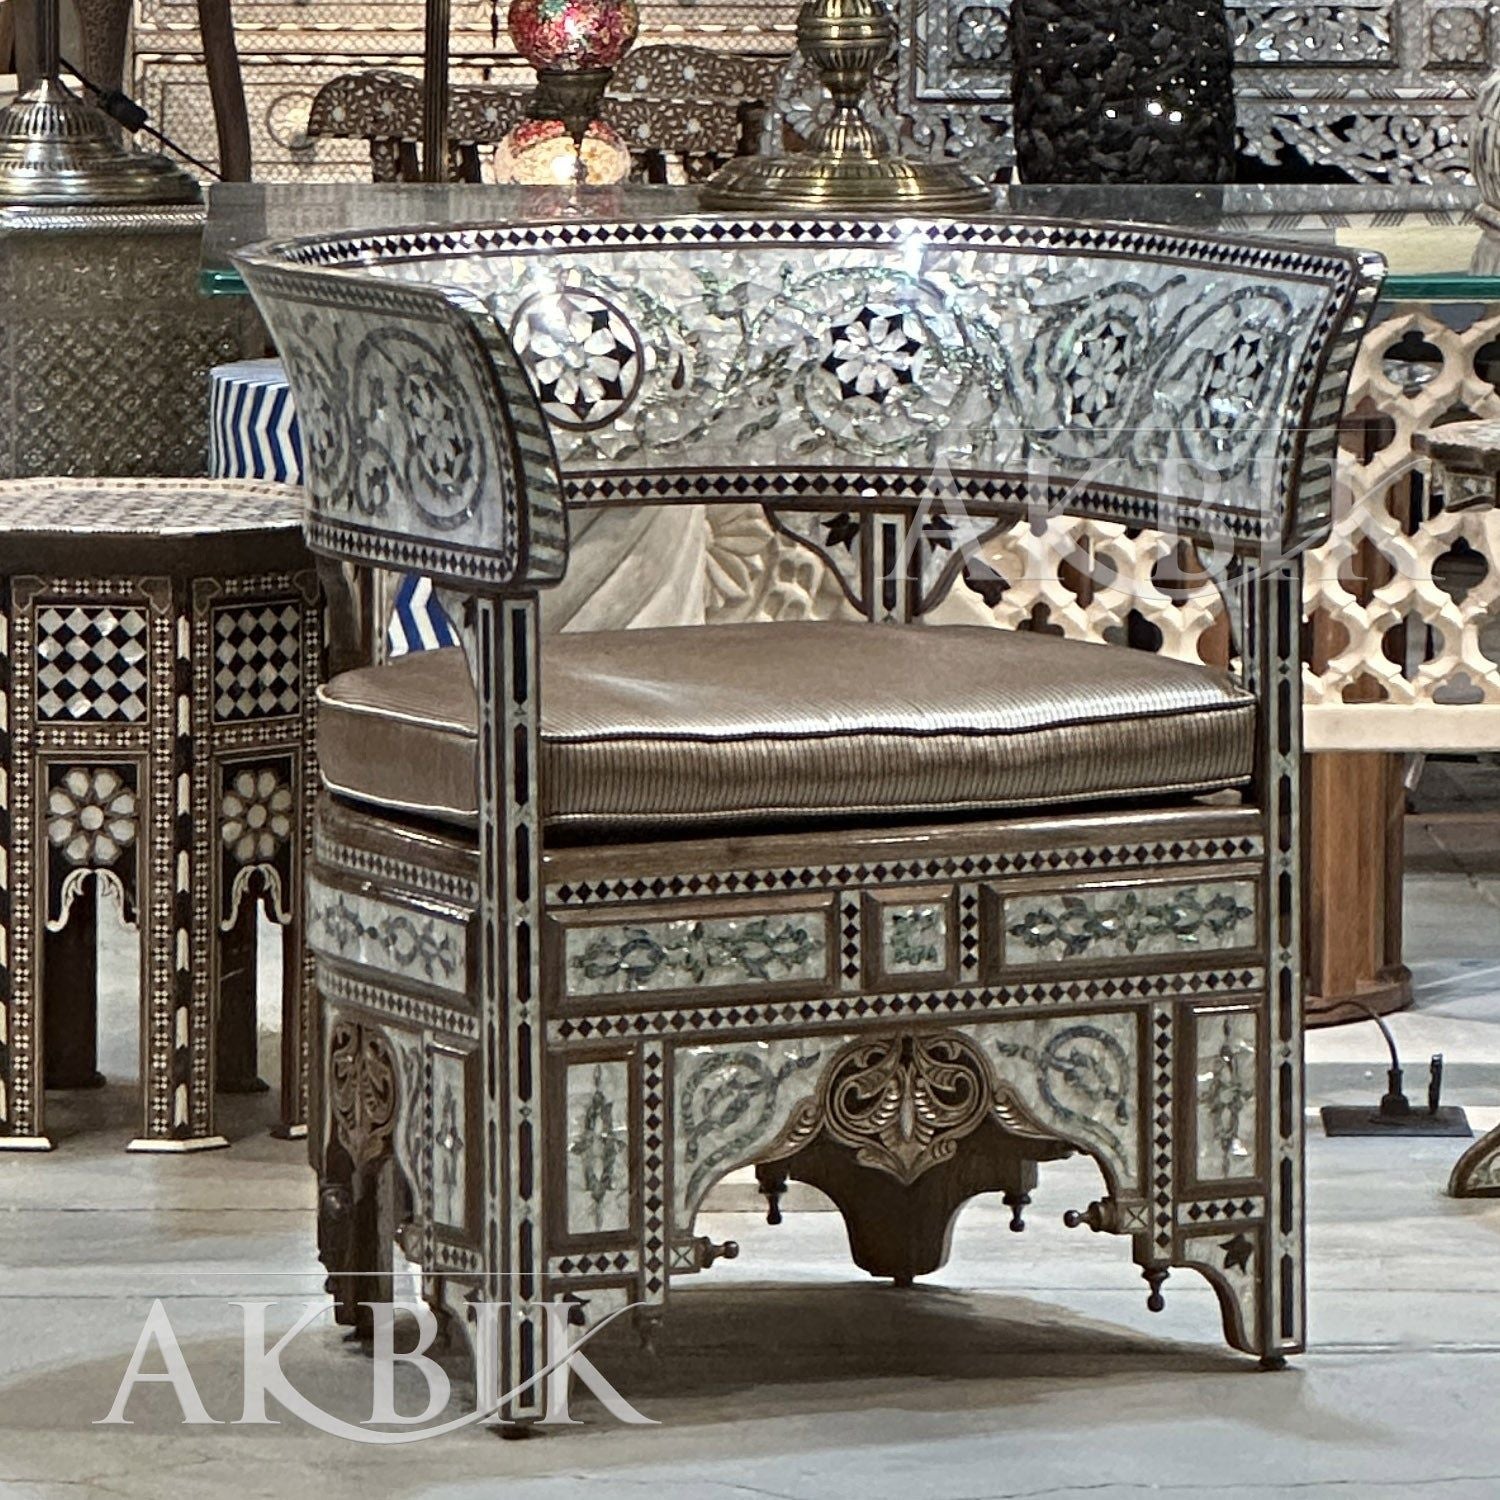 Crystalline mother of pearl and abalone chair - AKBIK Furniture & Design